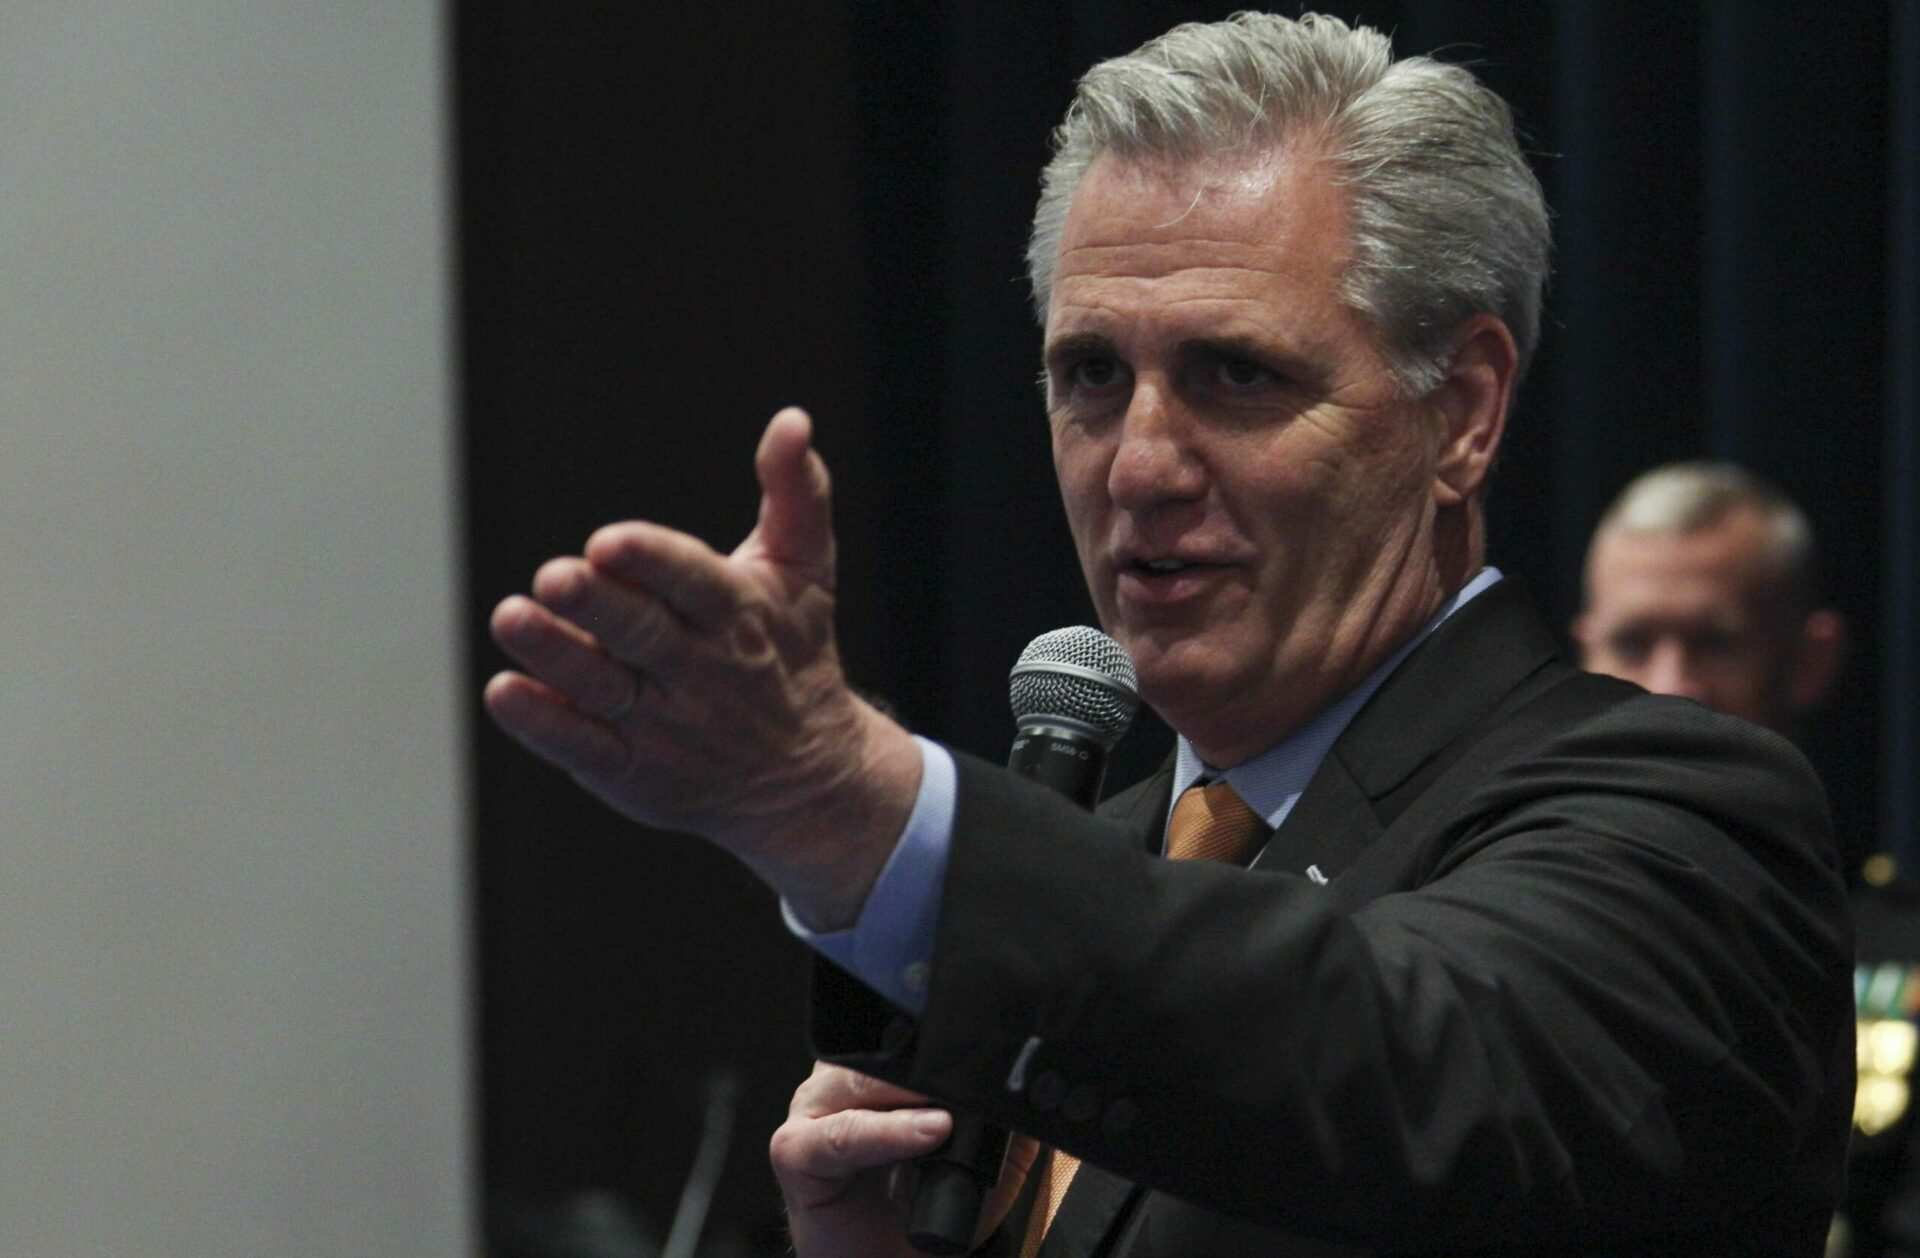 McCarthy to meet Taiwan president in CA, not Taiwan, fearing China’s response: Report